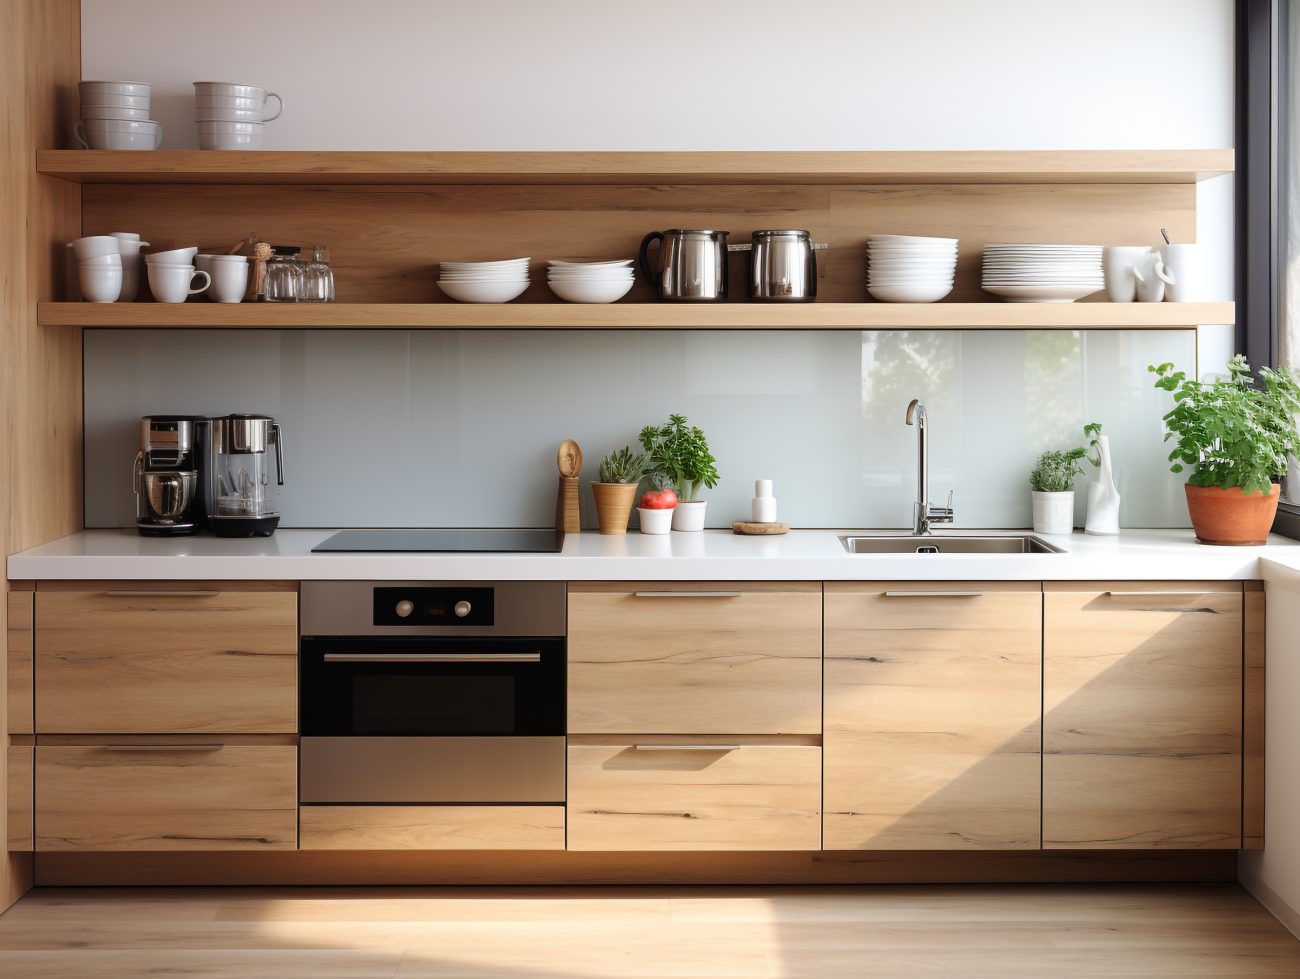 One-wall kitchen layout with built-in wooden texture cabinets and shelve, white dinnerware set